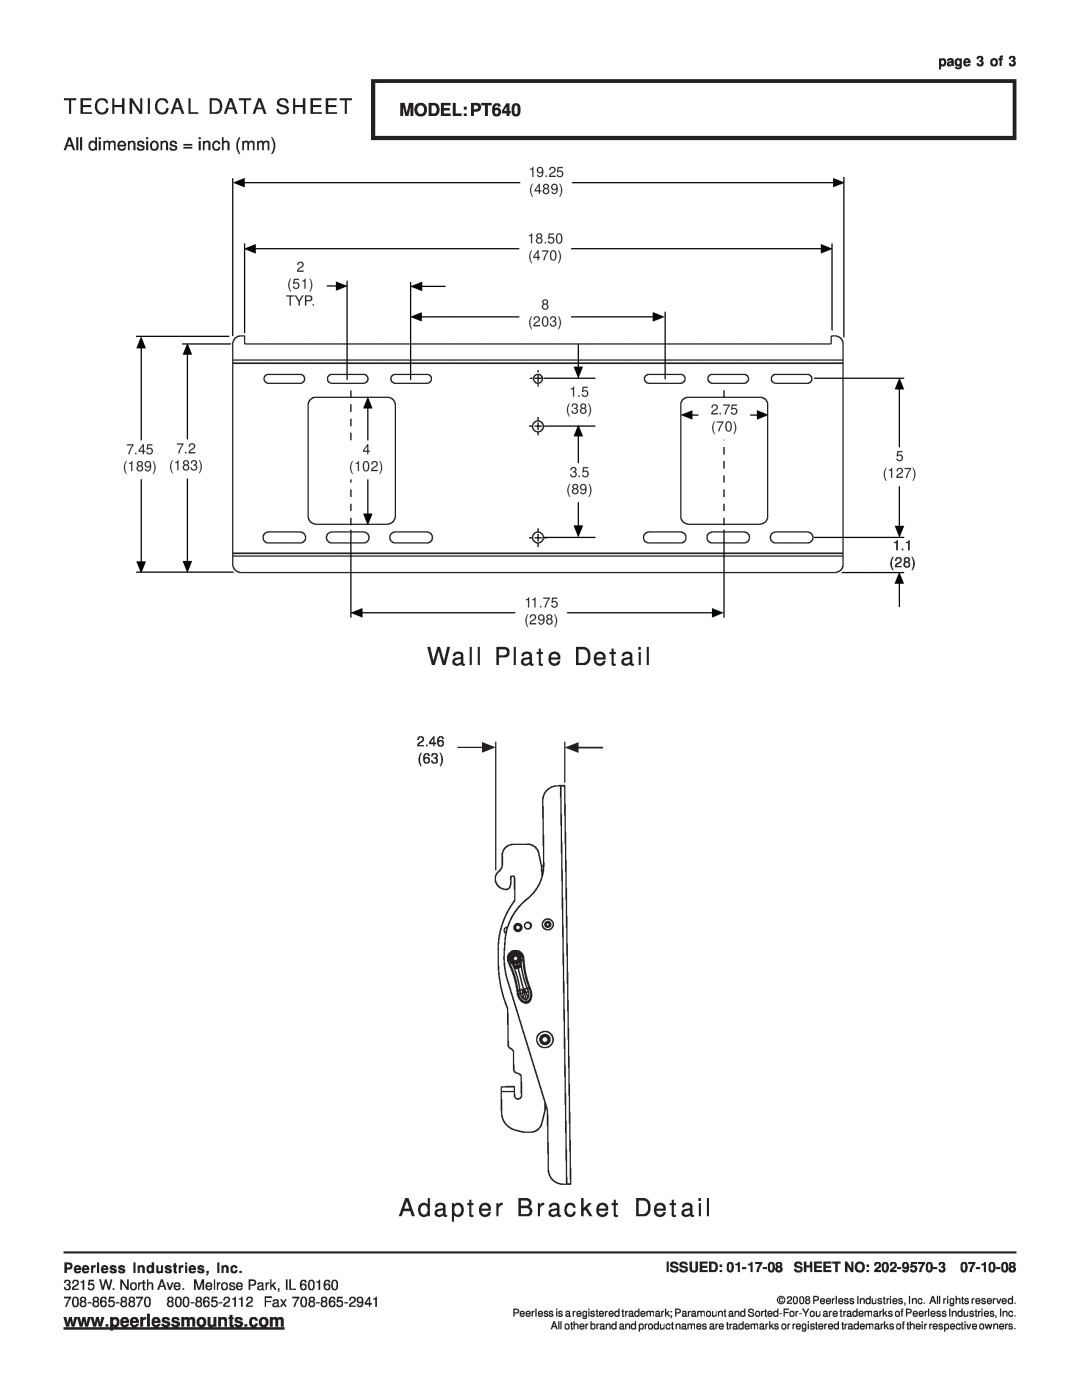 Peerless Industries dimensions Wall Plate Detail, Adapter Bracket Detail, Technical Data Sheet, MODEL PT640, page 3 of 